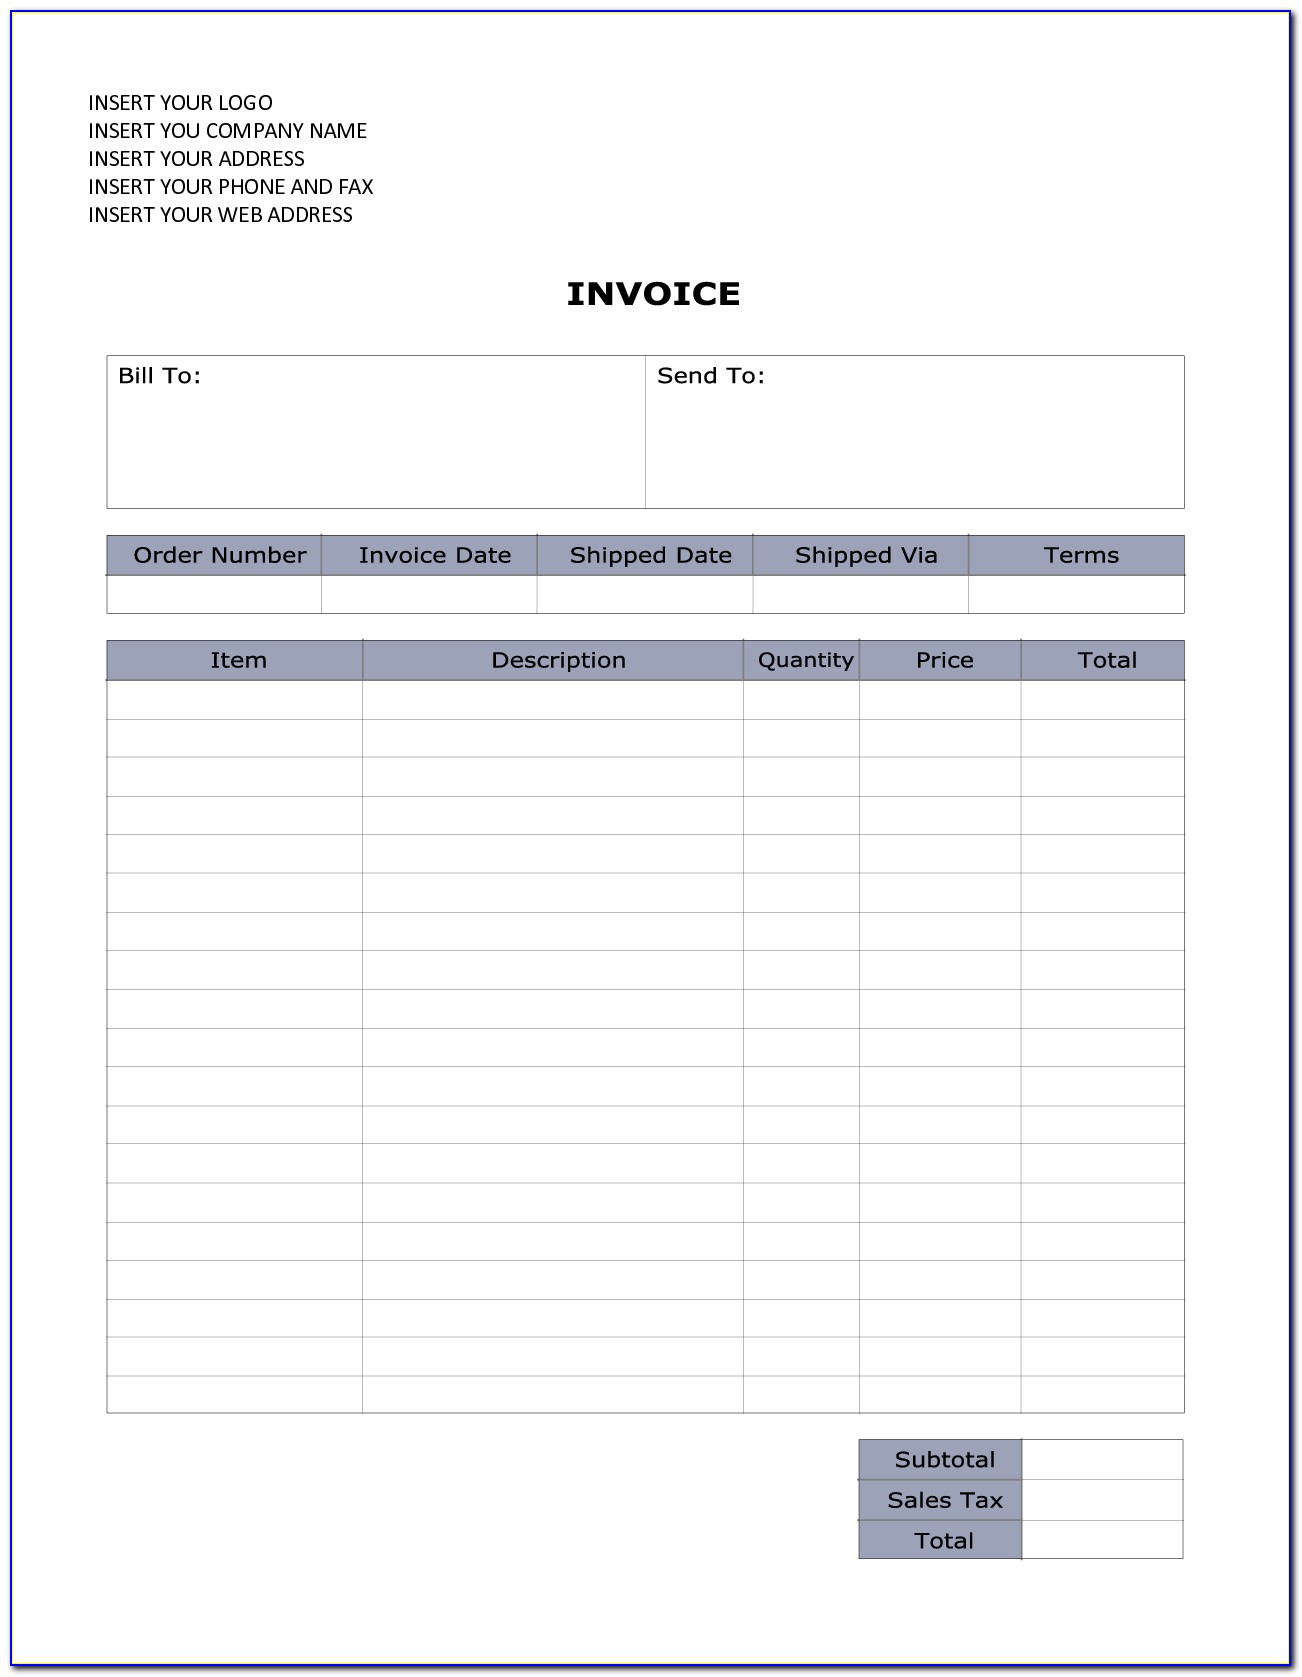 Example Invoice Word Format